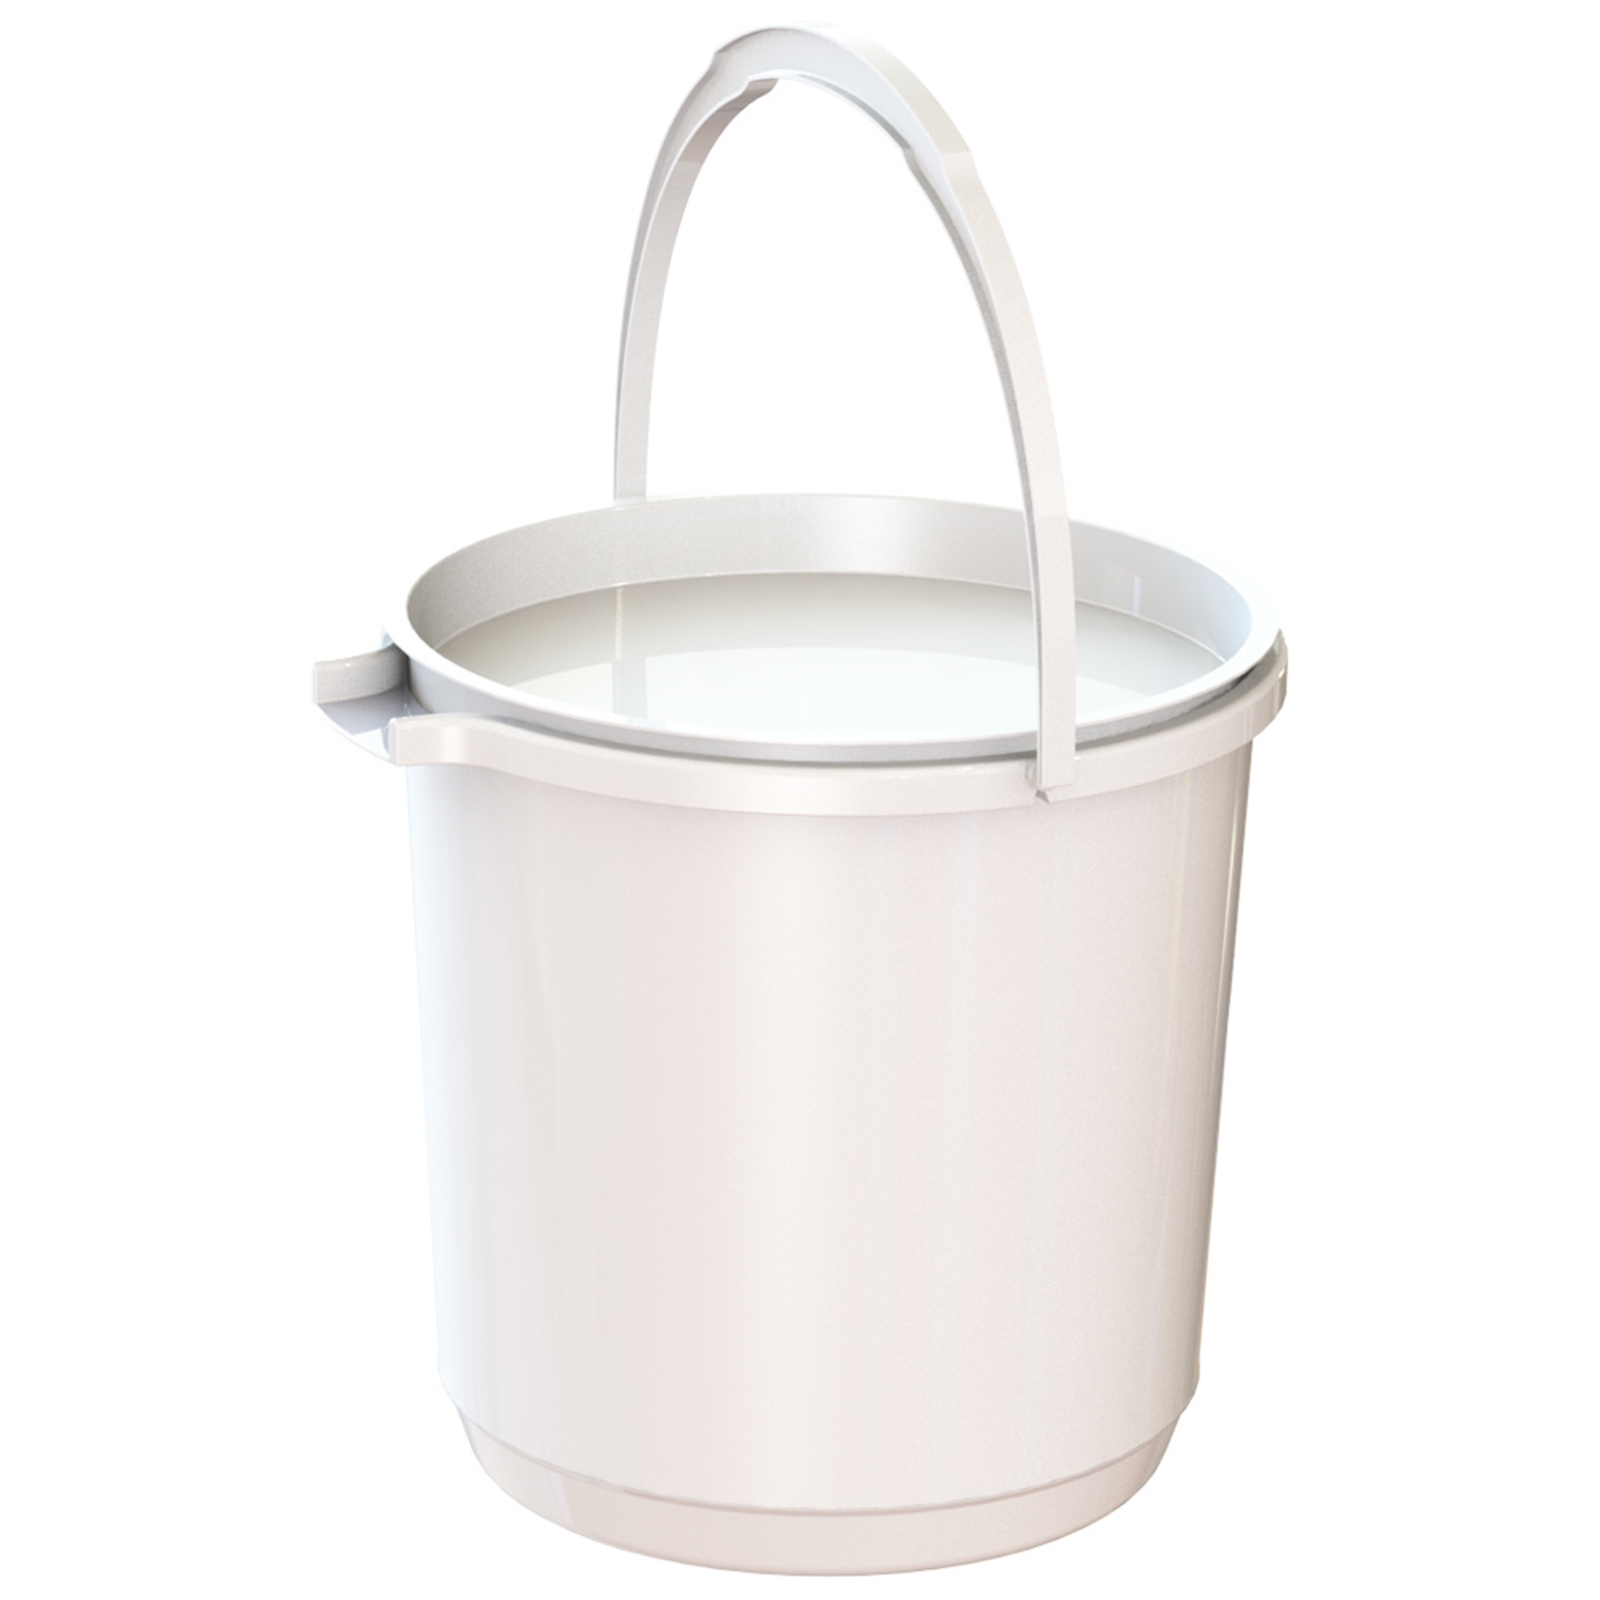 HomeLeisure 11L Charcoal Trend Bucket - With Lid